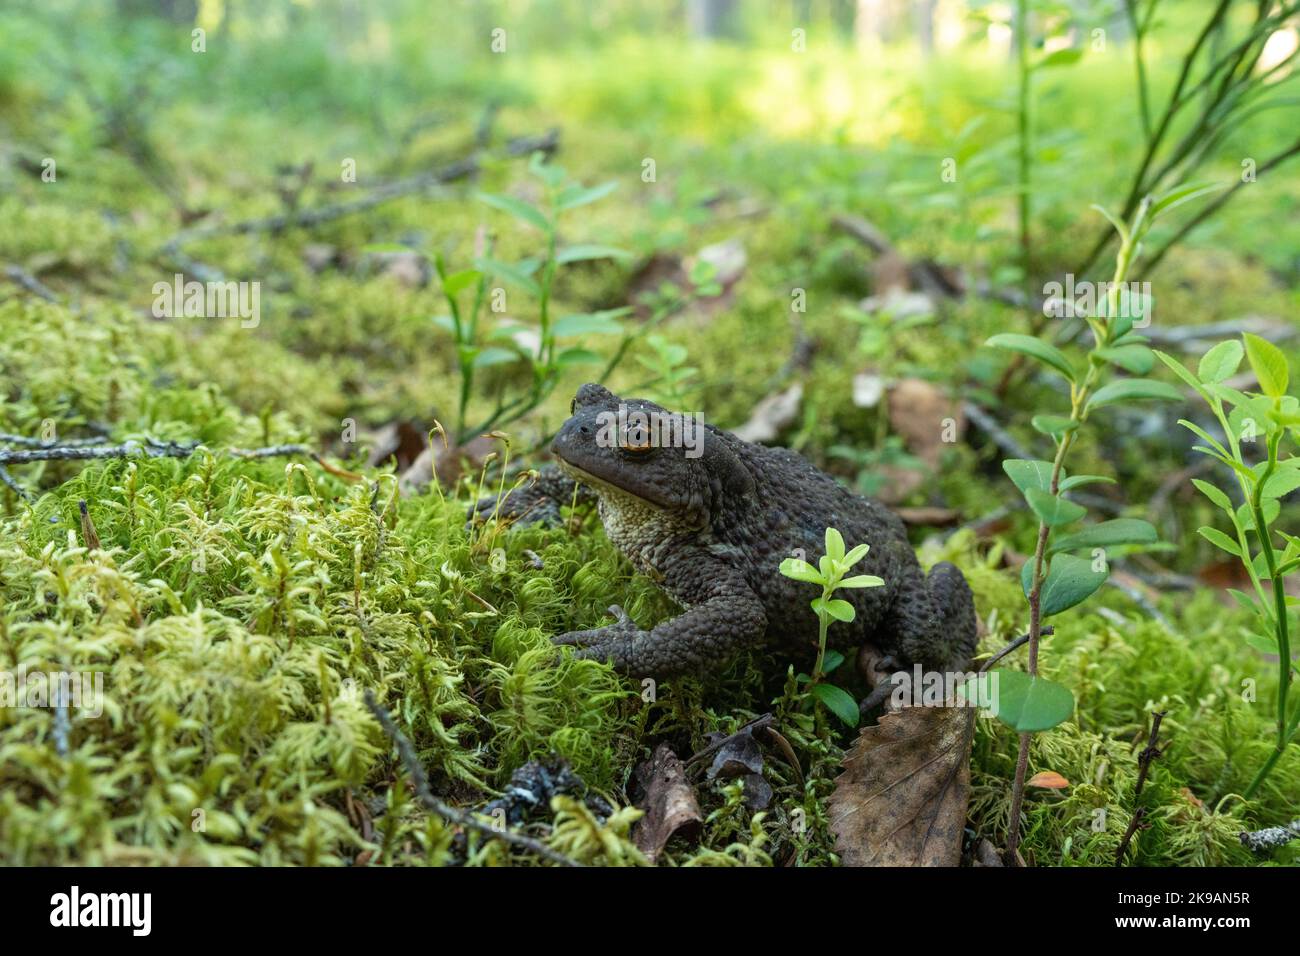 A large Common toad, Bufo bufo standing in a woodland environment in Närängänvaara protected forest near Kuusamo, Northern Finland Stock Photo